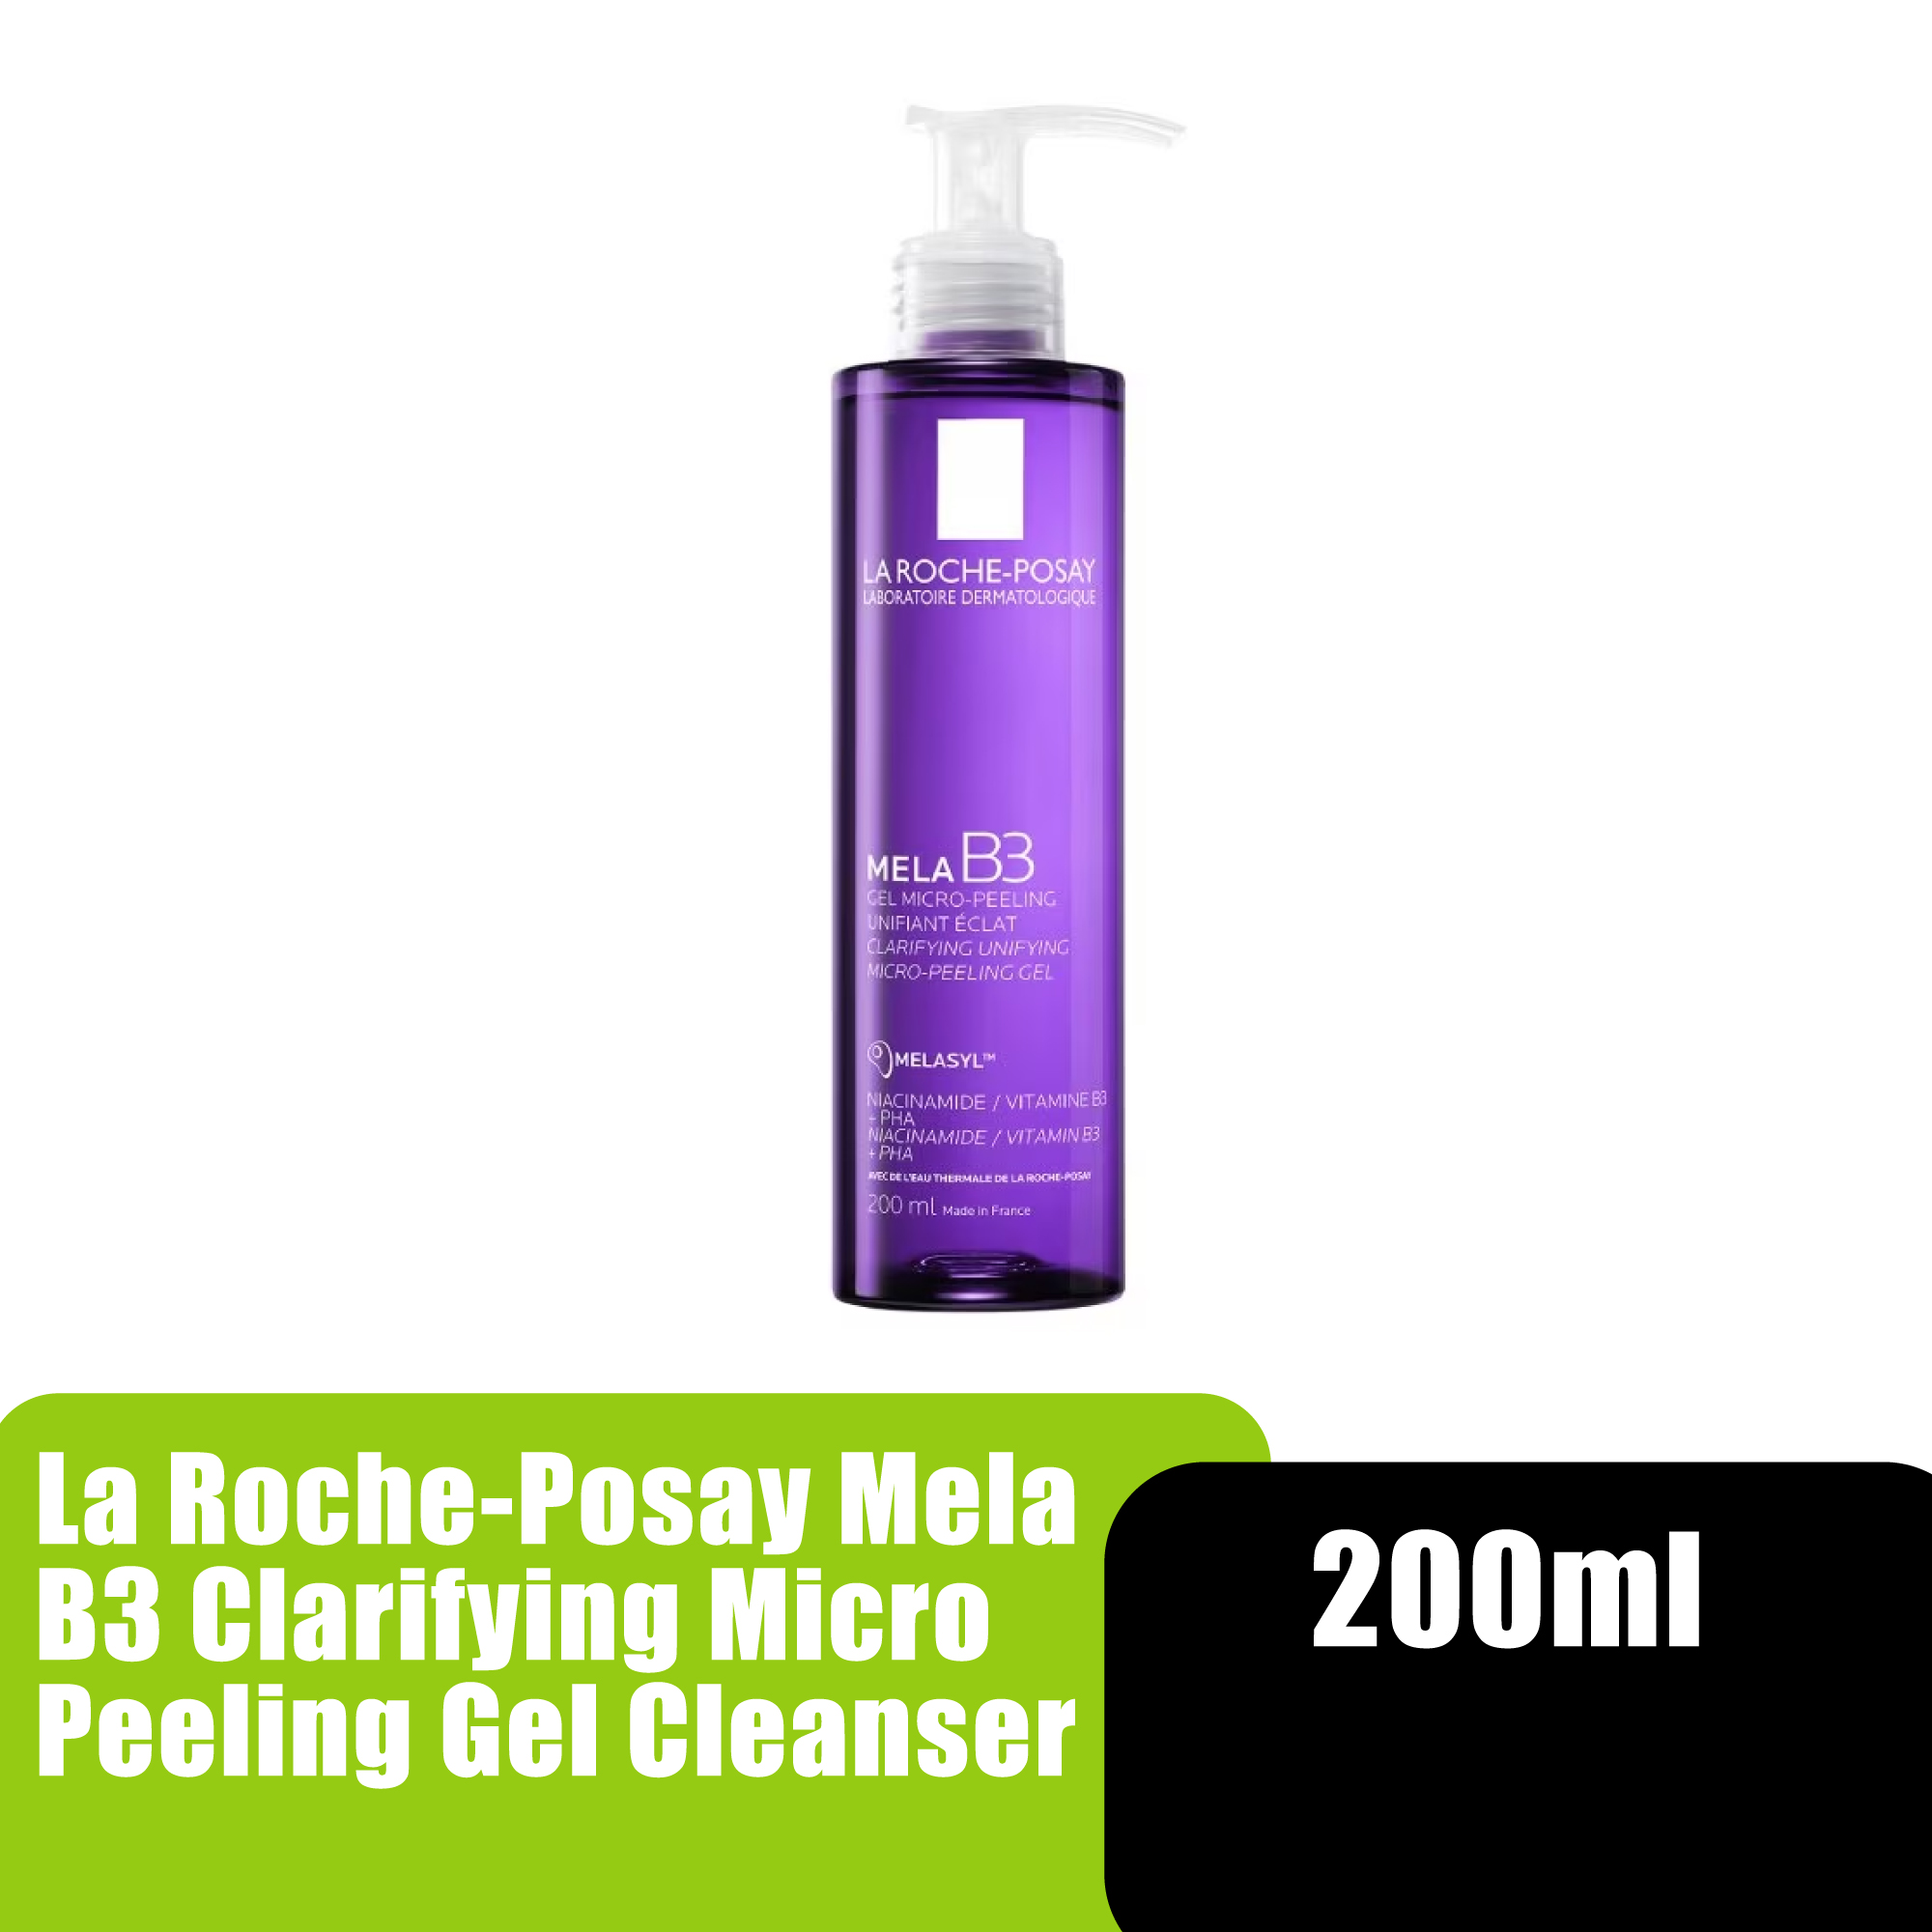 LA ROCHE POSAY Facial Cleanser Mela B3 (200ml) with Melasyl for Anti Aging, Anti Wrinkle Dark Spot Face Cleanser